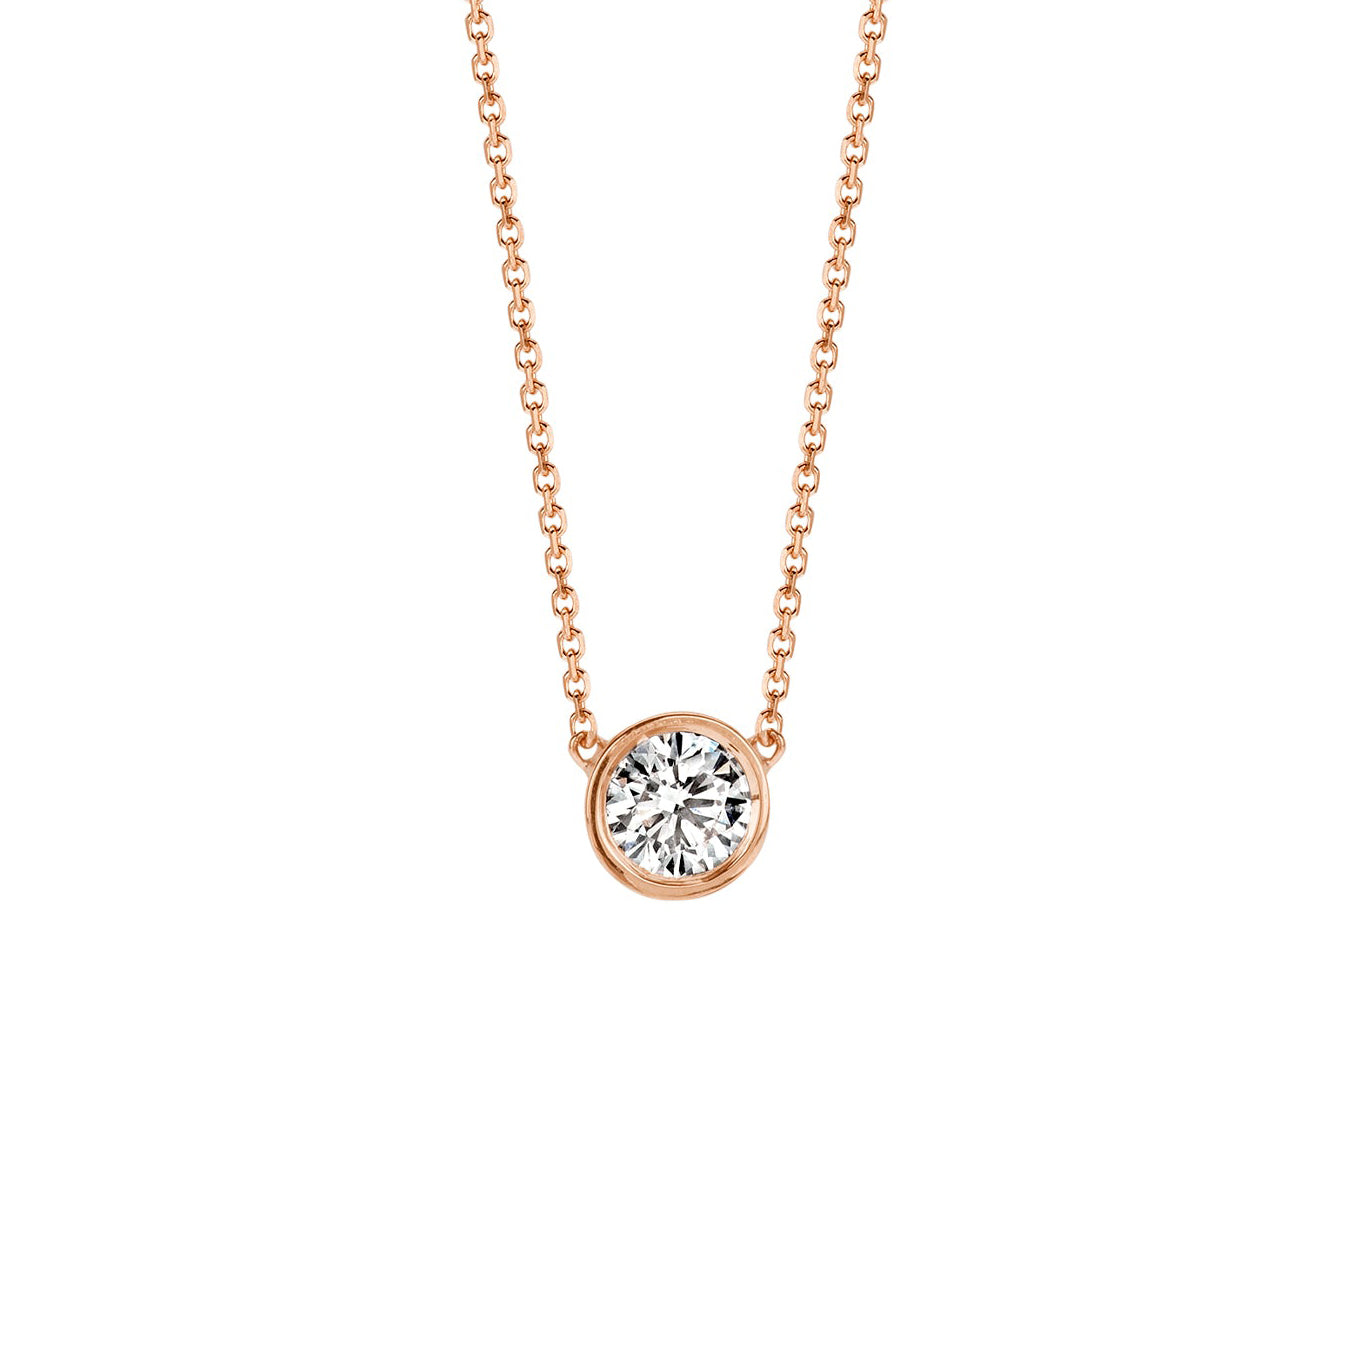  Featherly adjustable cubic zirconia bezel necklace in rose gold 